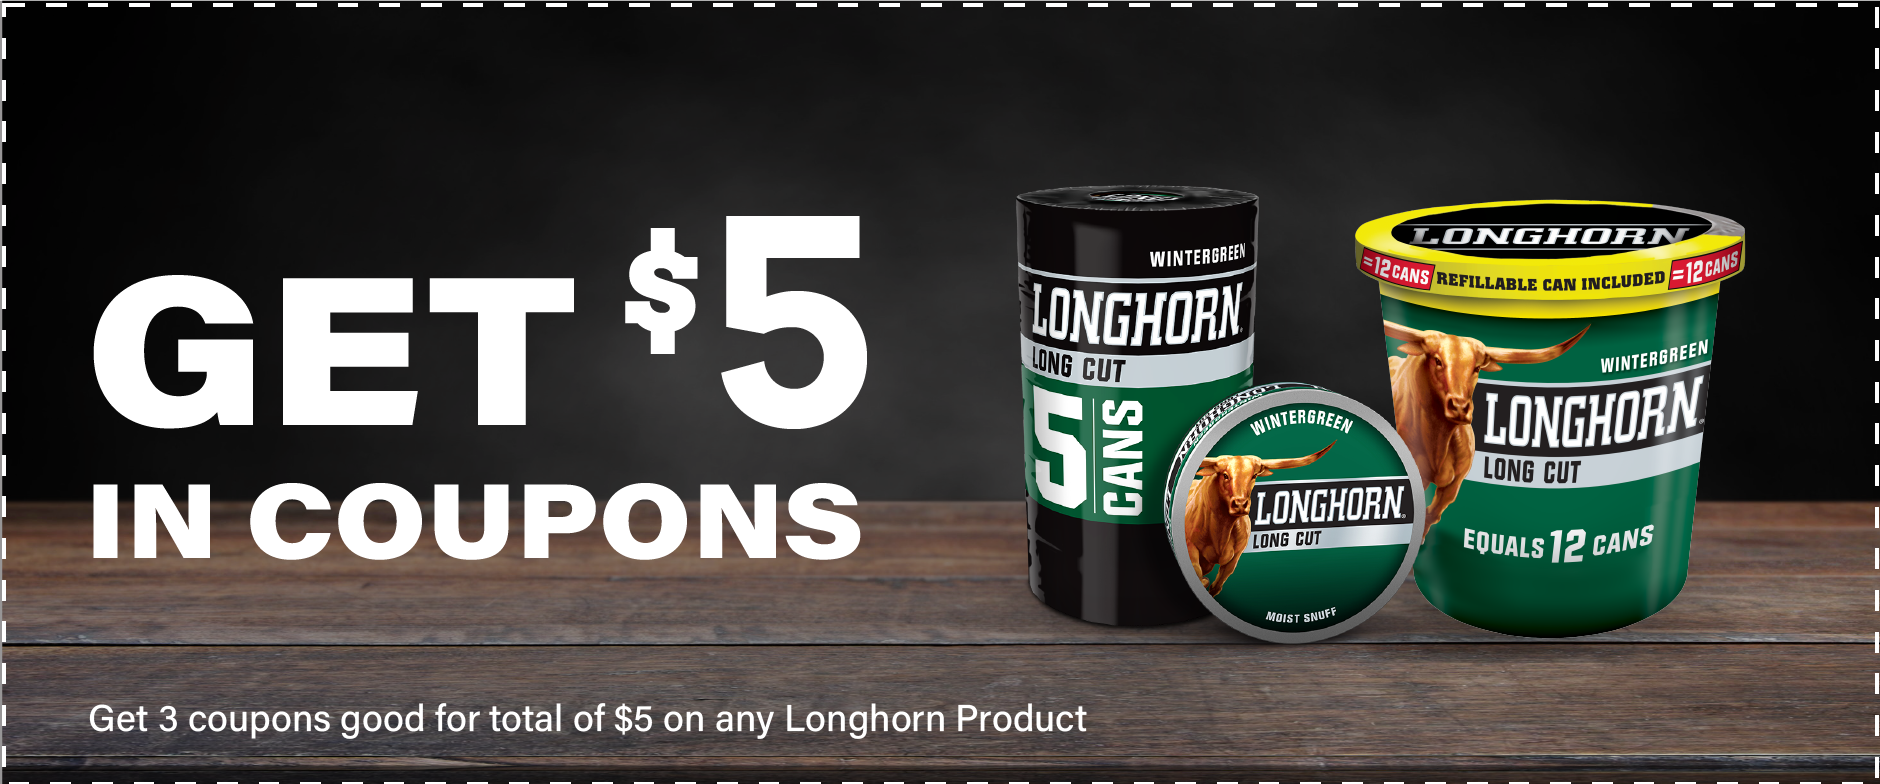 A coupon offer for three coupons good for a total of five dollars in savings. On the left of the coupon is an arrangement of Longhorn Wintergreen products.